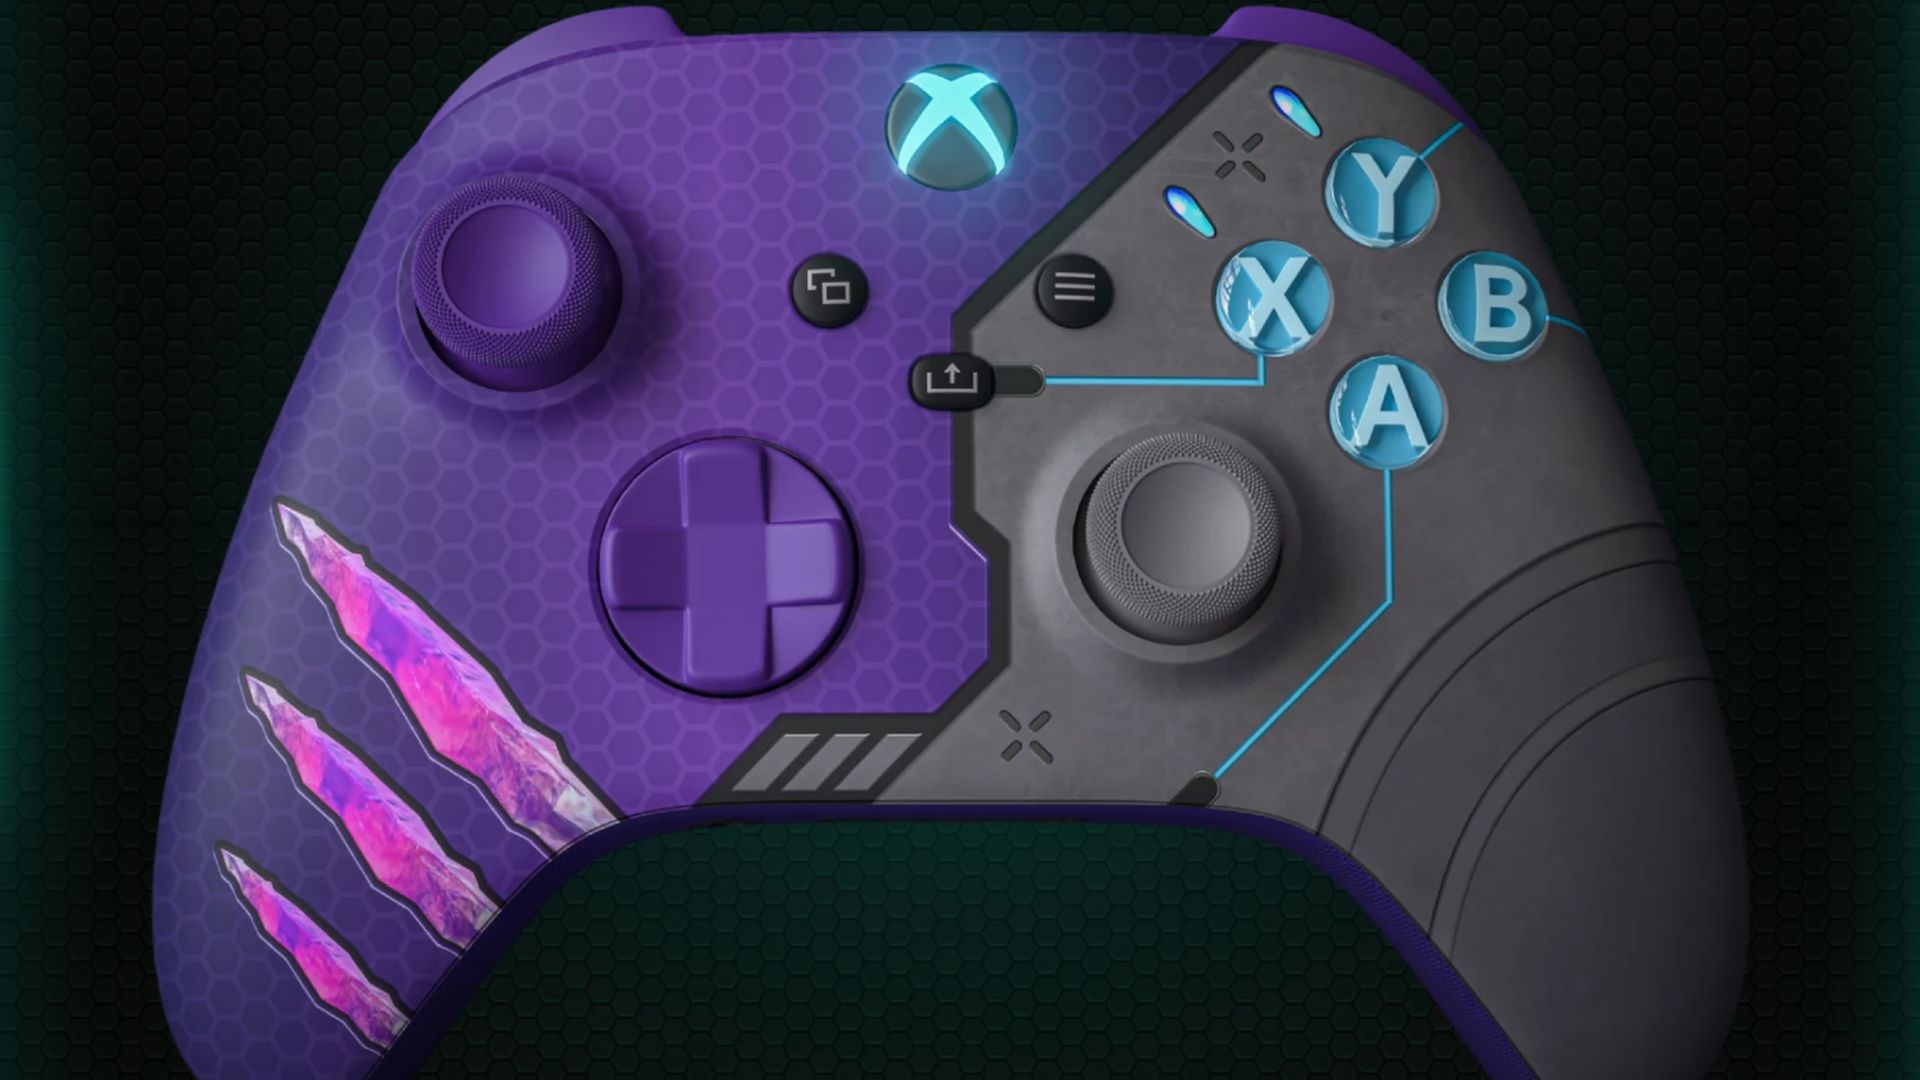 This Custom Halo Infinite Xbox Series X Controller Is Inspired By The